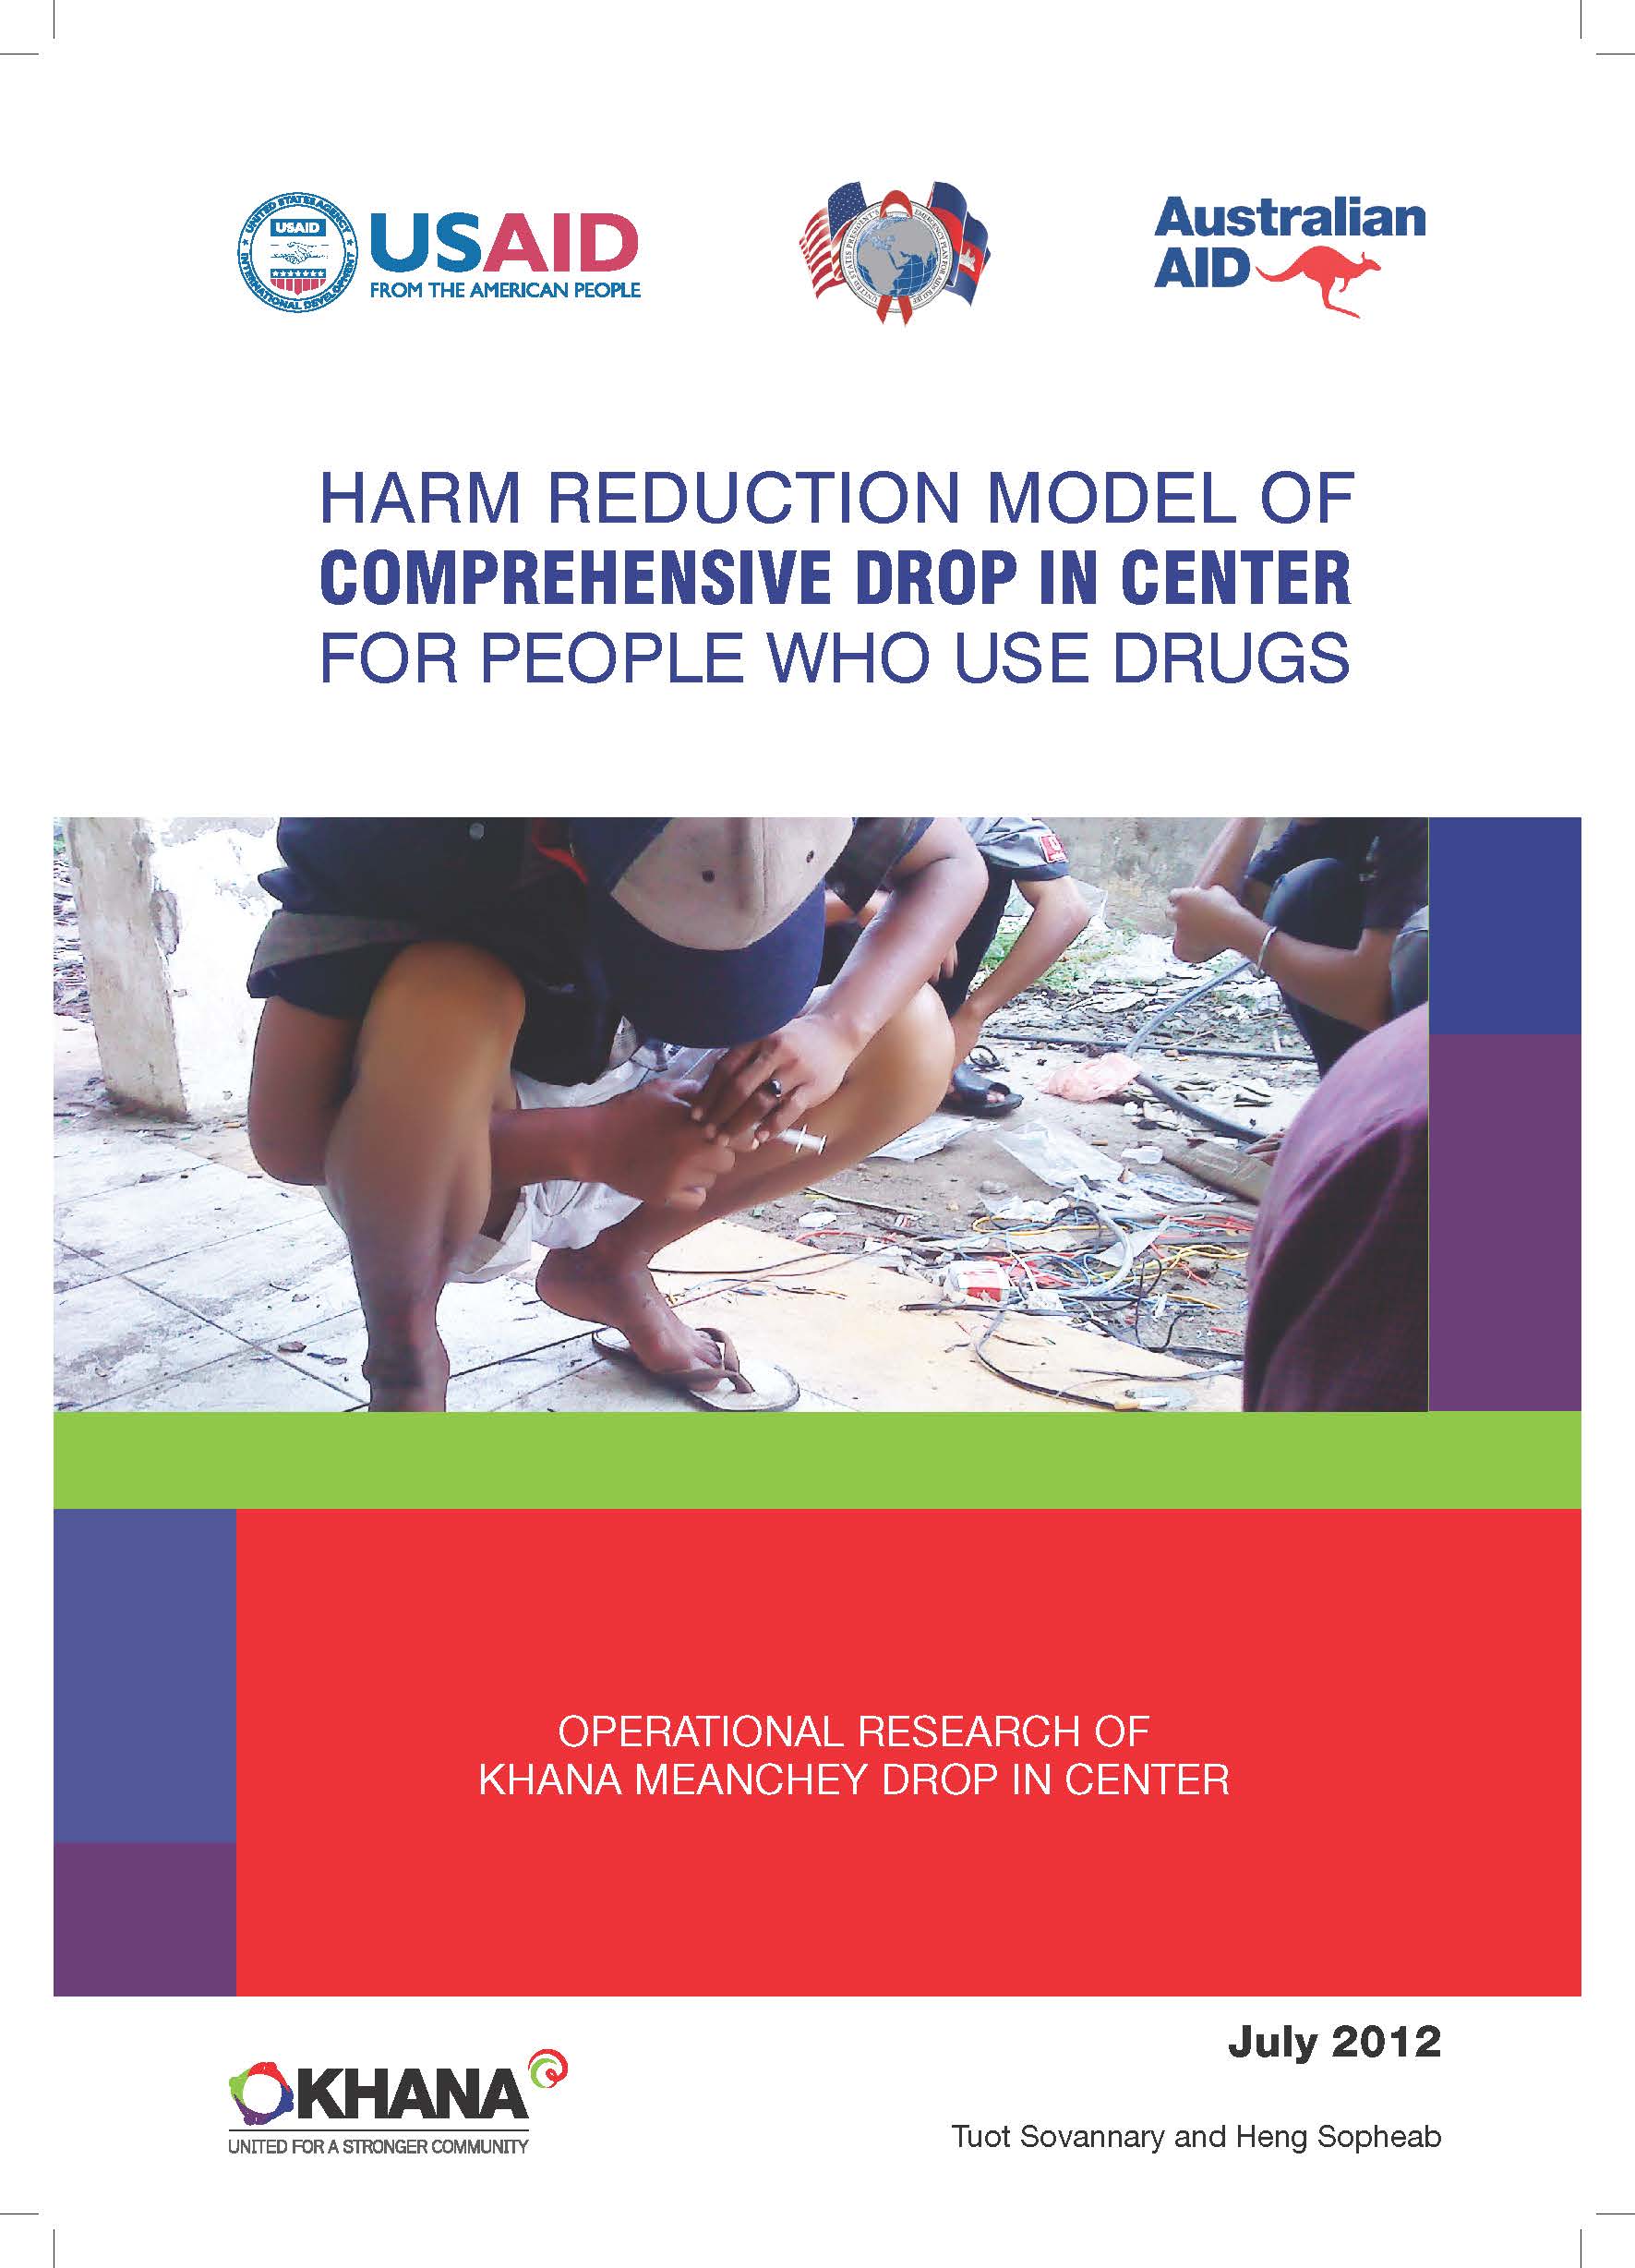 Harm Reduction Model of Comprehensive Drop-in Center for People who use drugs